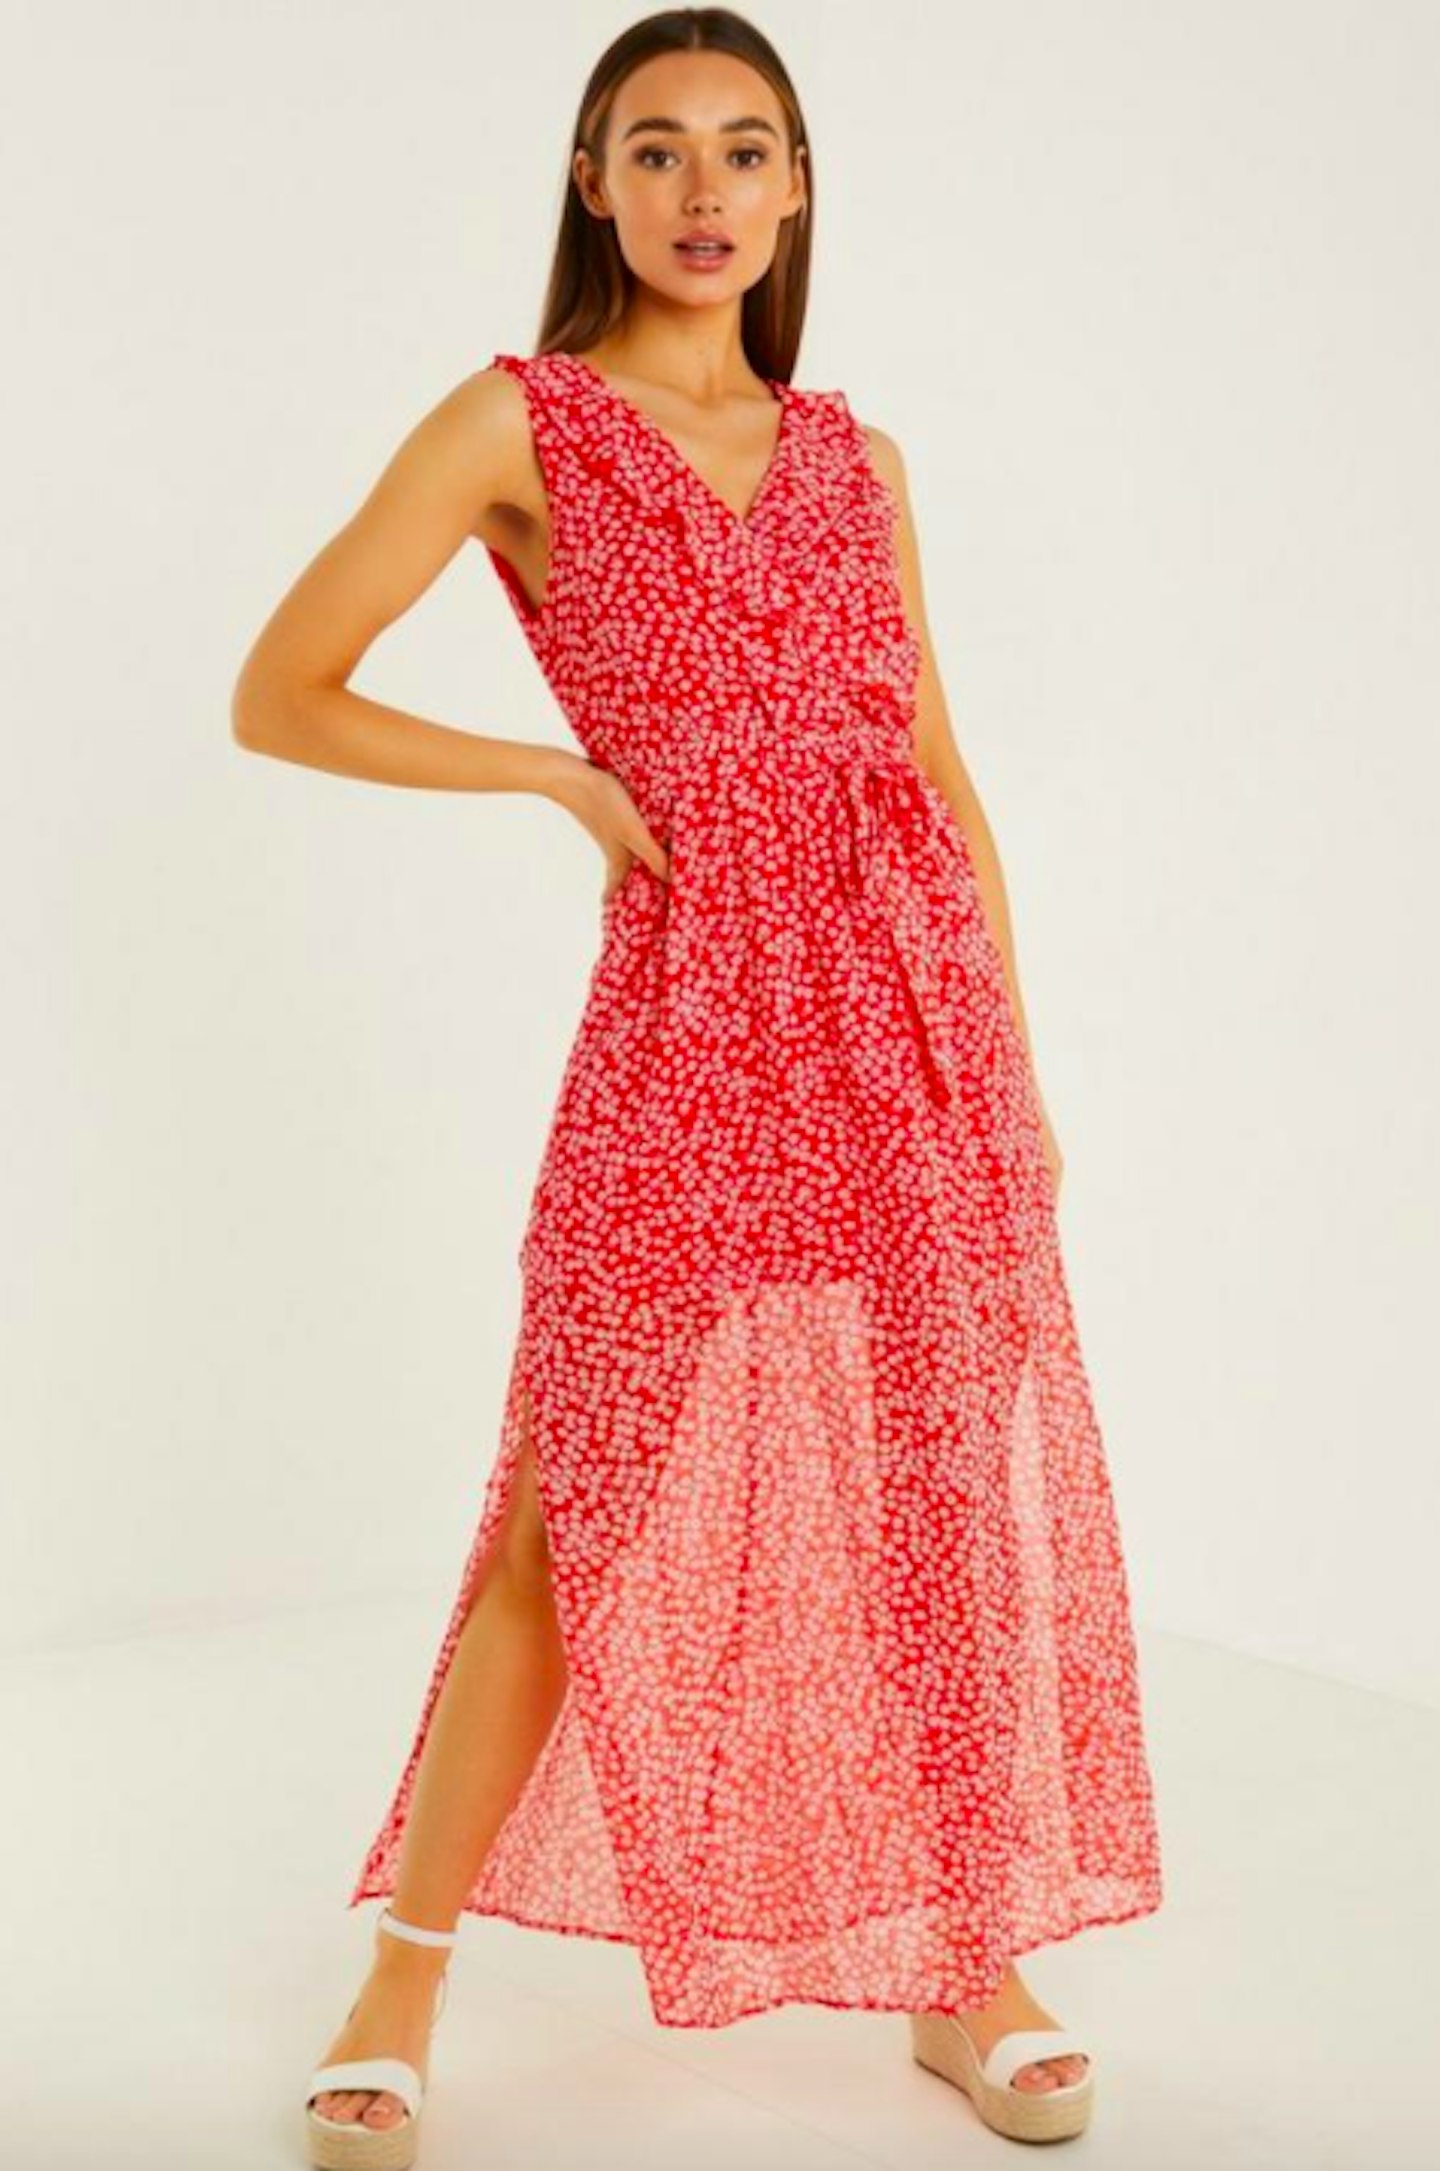 Red & White Floral Wrap Maxi Dress